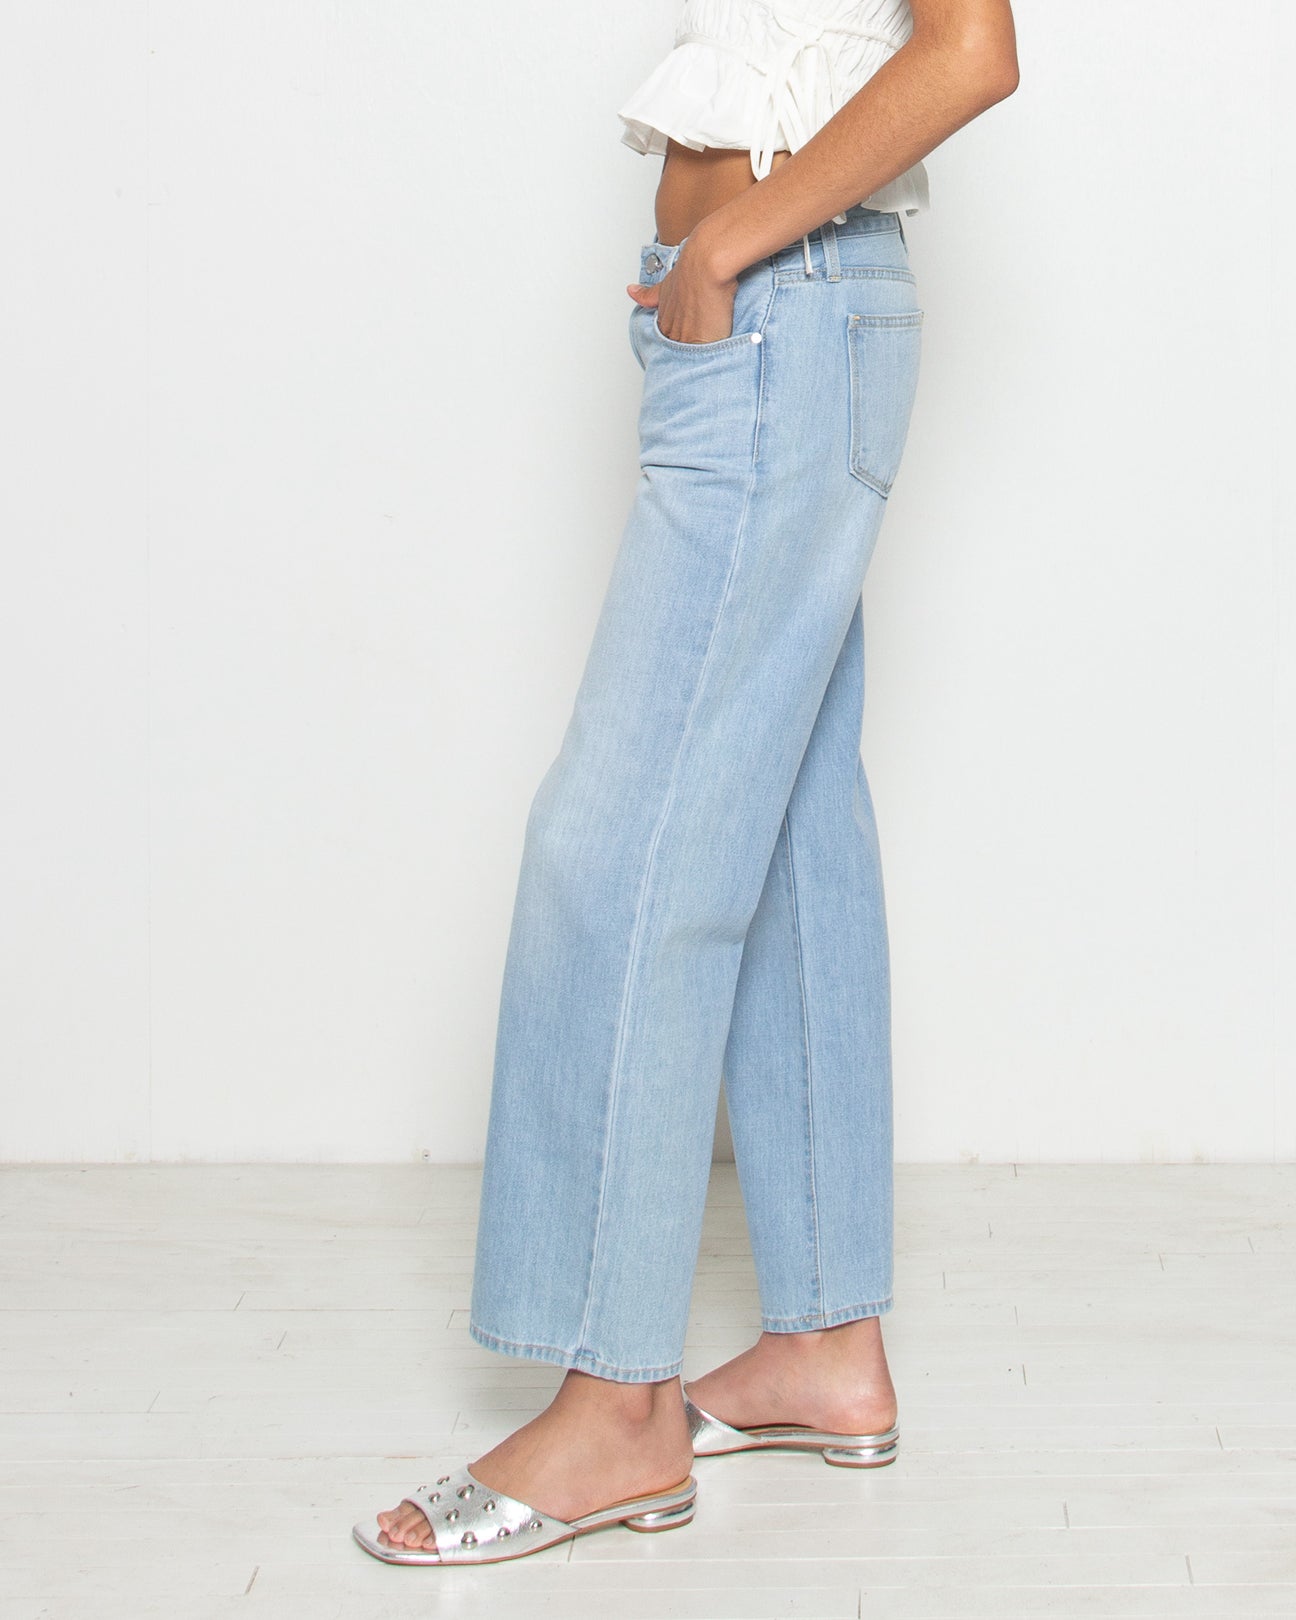 JUST BLACK DENIM Low Rise Baggy Jeans in Light Wash